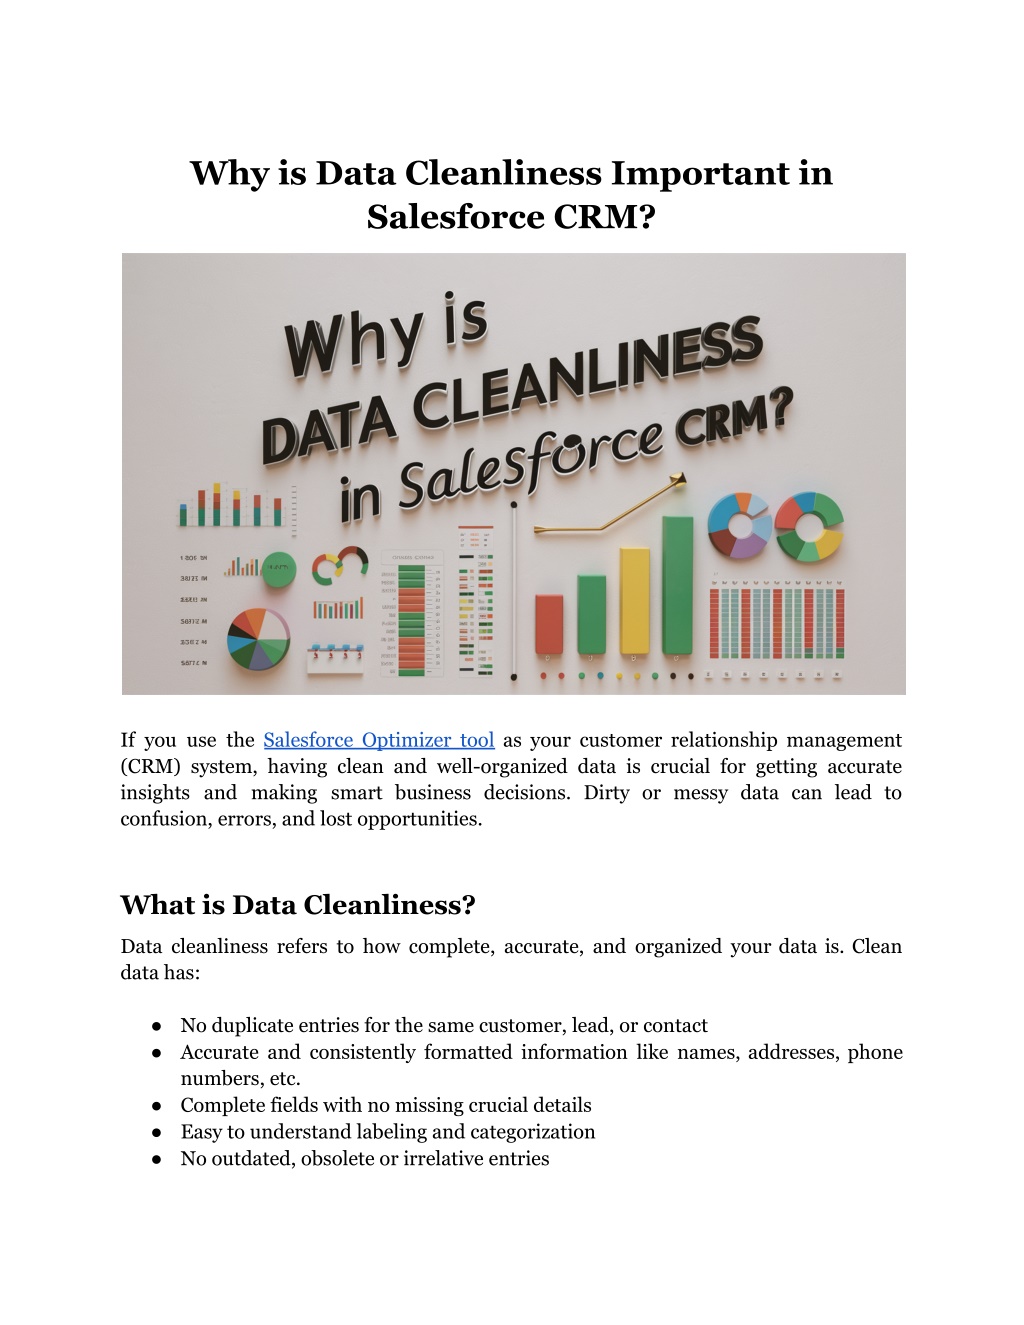 why is data cleanliness important in salesforce l.w